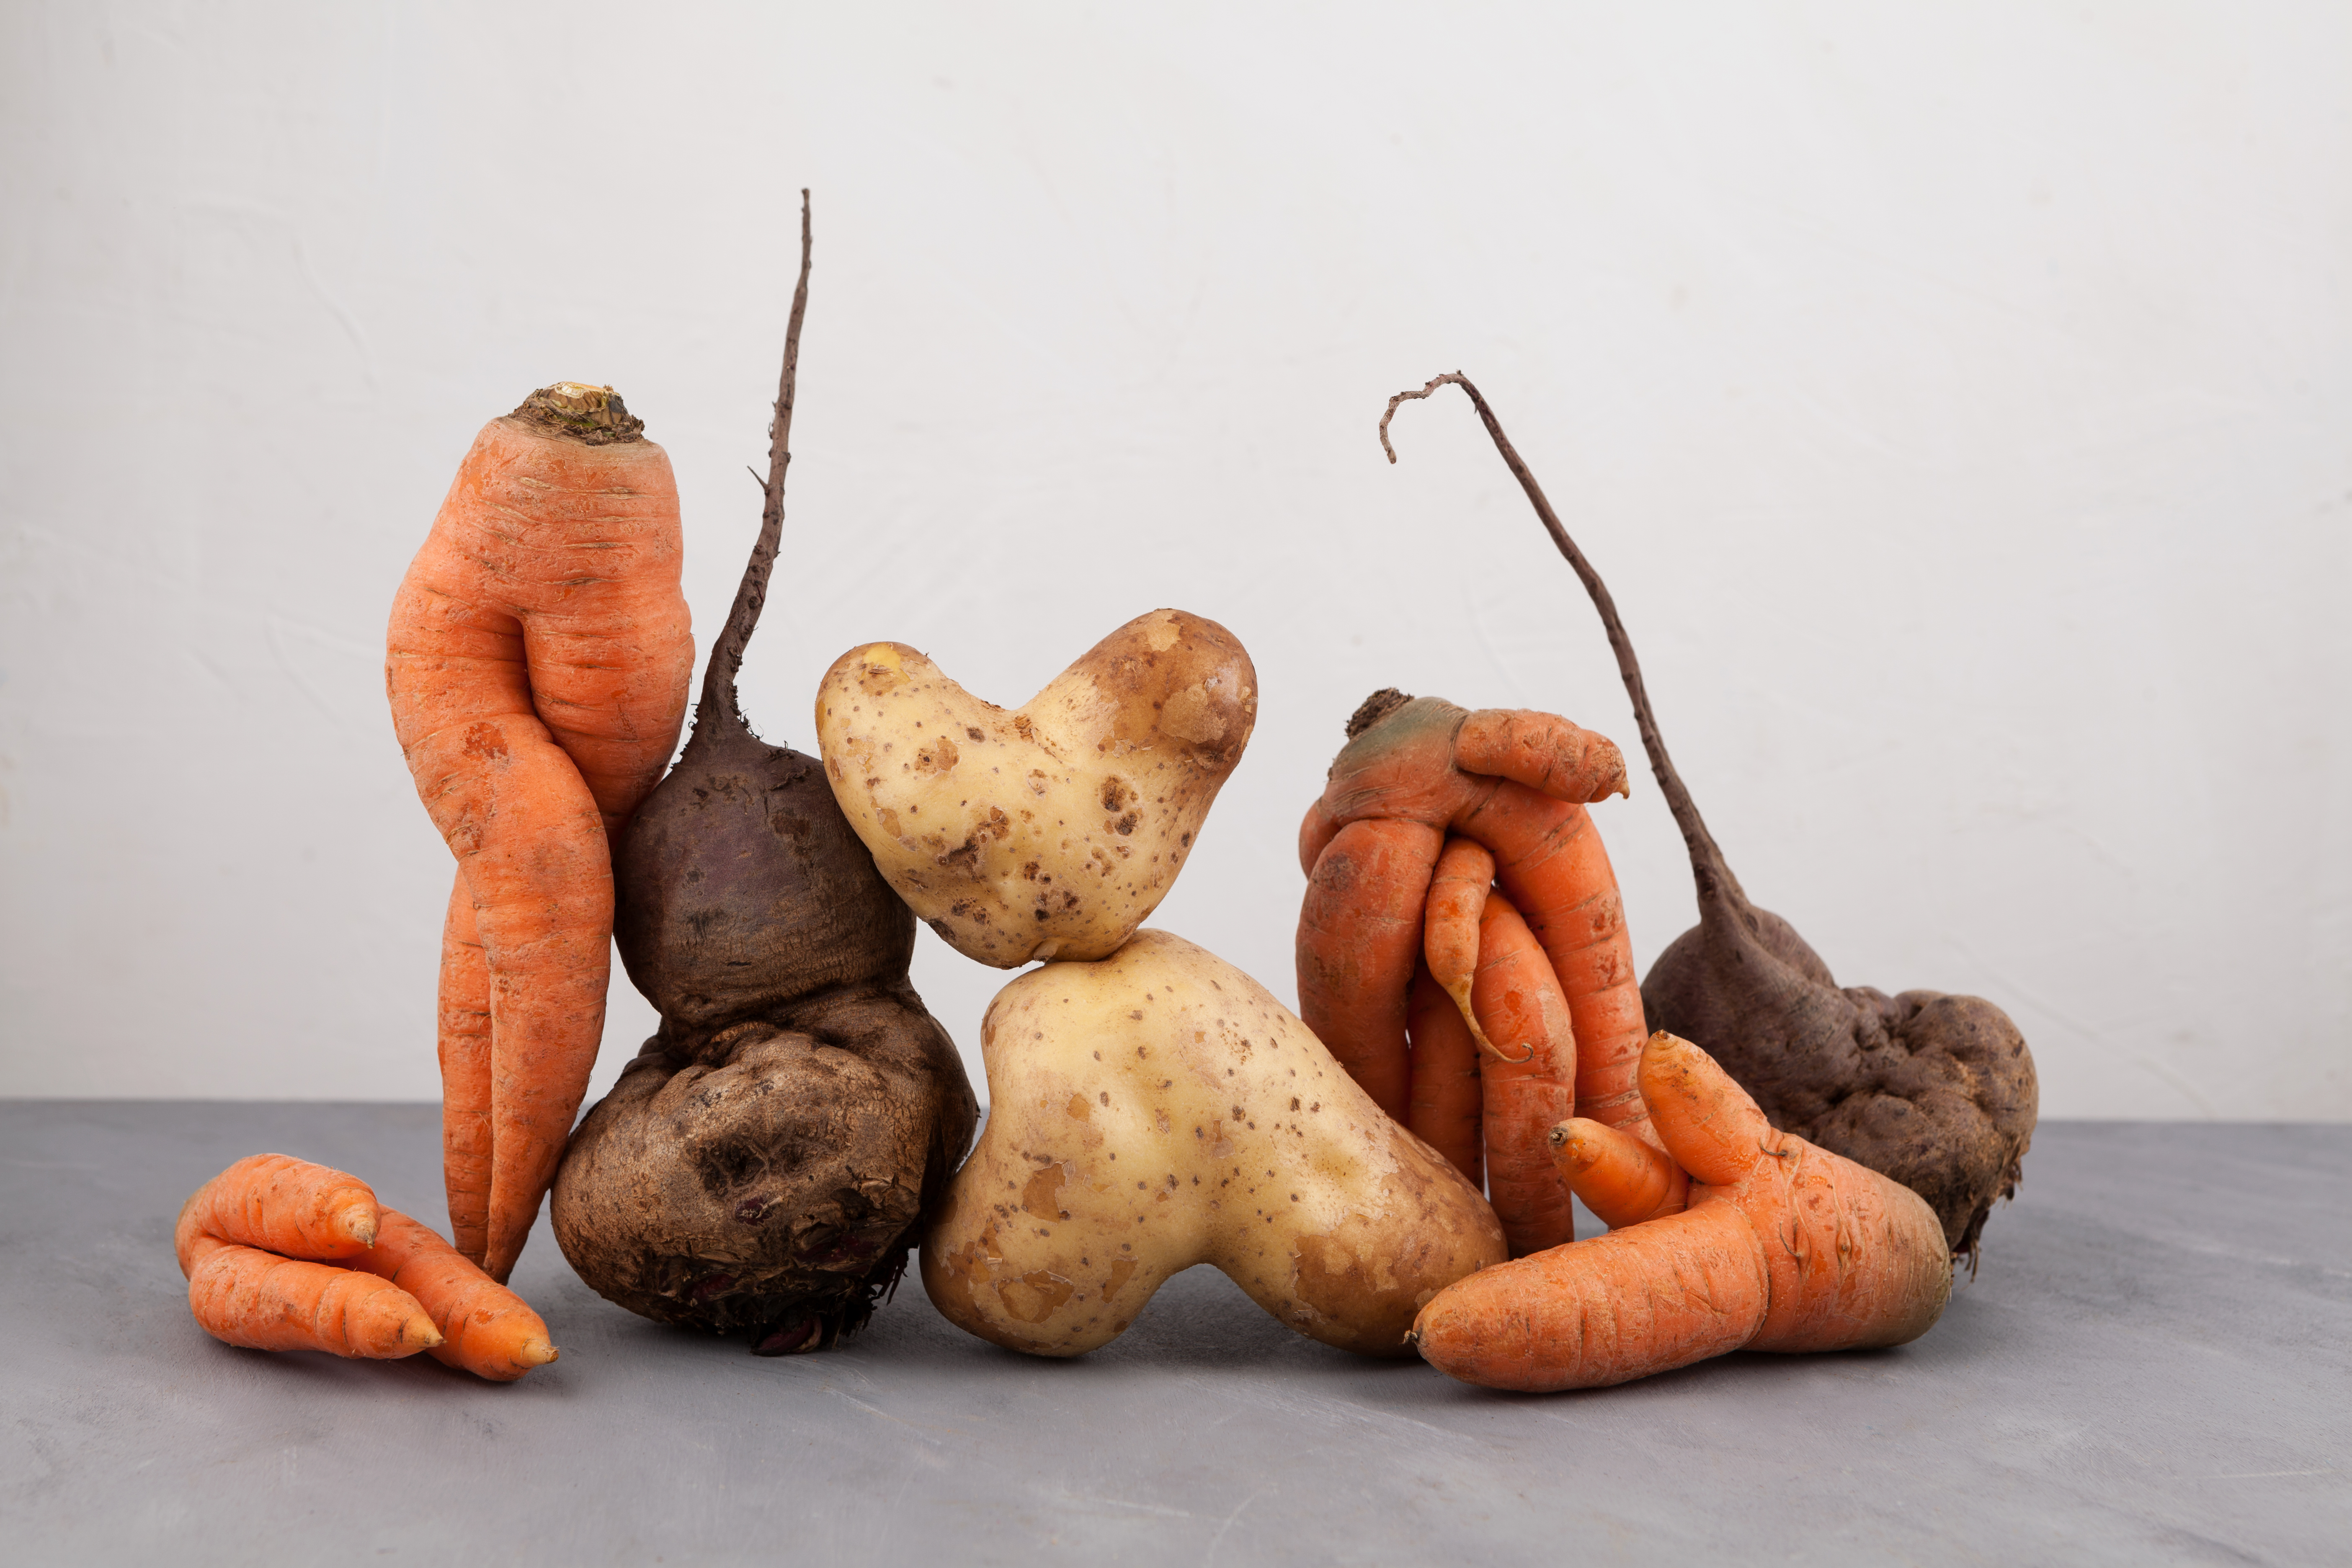 ugly vegetables need love too